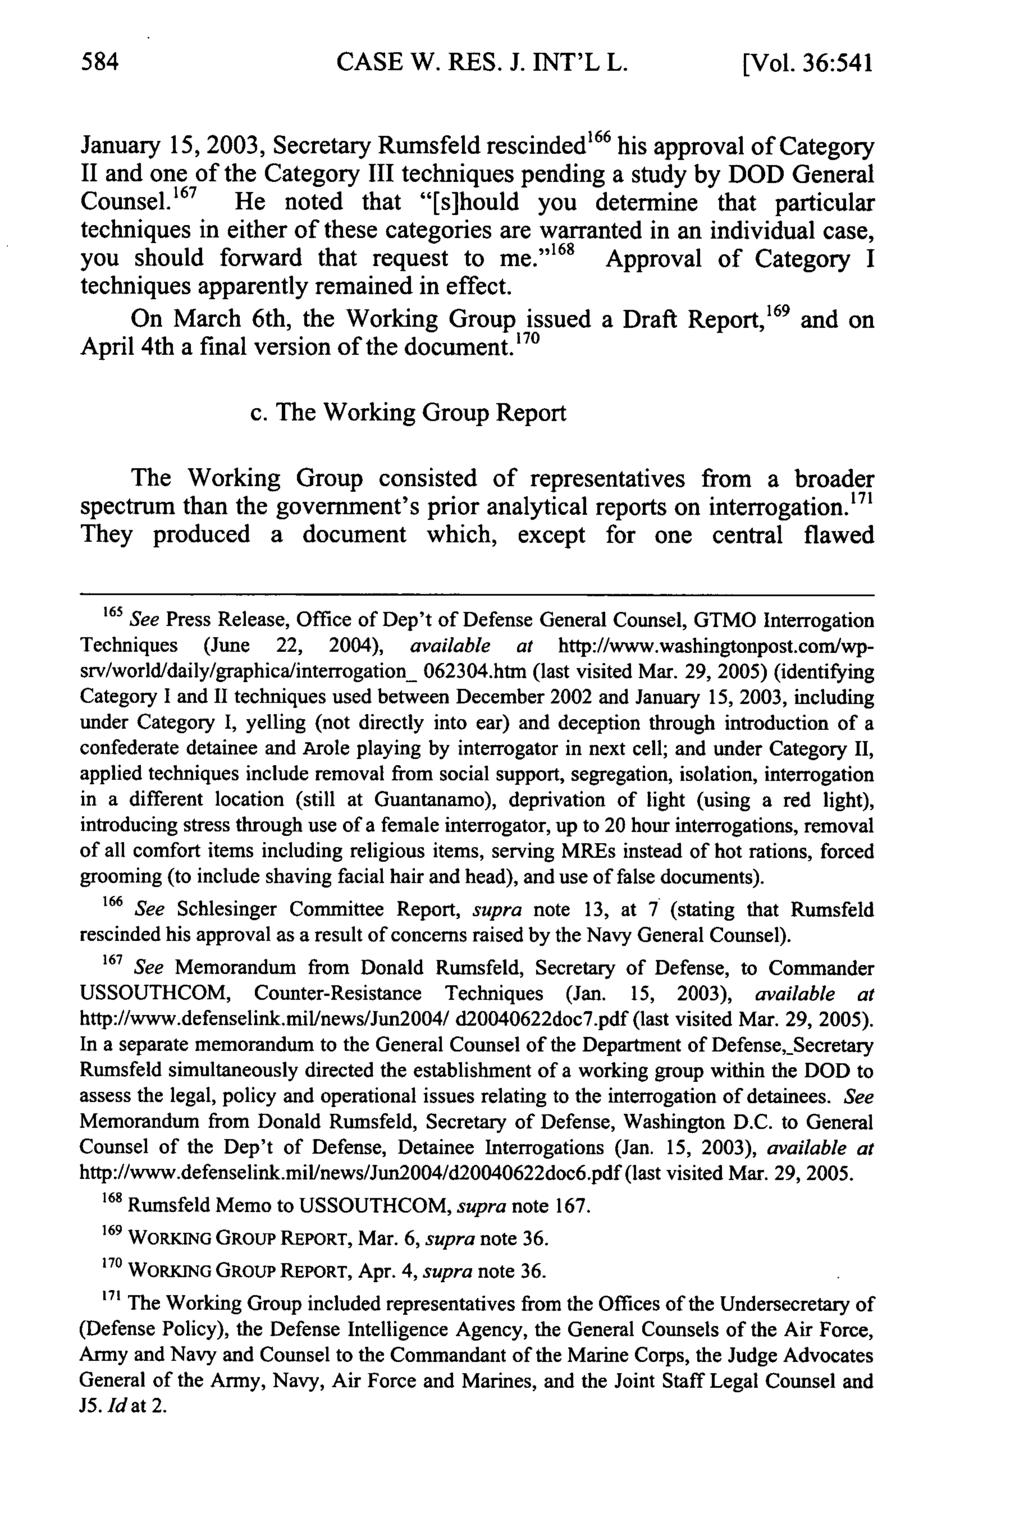 CASE W. RES. J. INT'L L. [Vol. 36:541 January 15, 2003, Secretary Rumsfeld rescinded 166 his approval of Category II and one of the Category III techniques pending a study by DOD General Counsel.